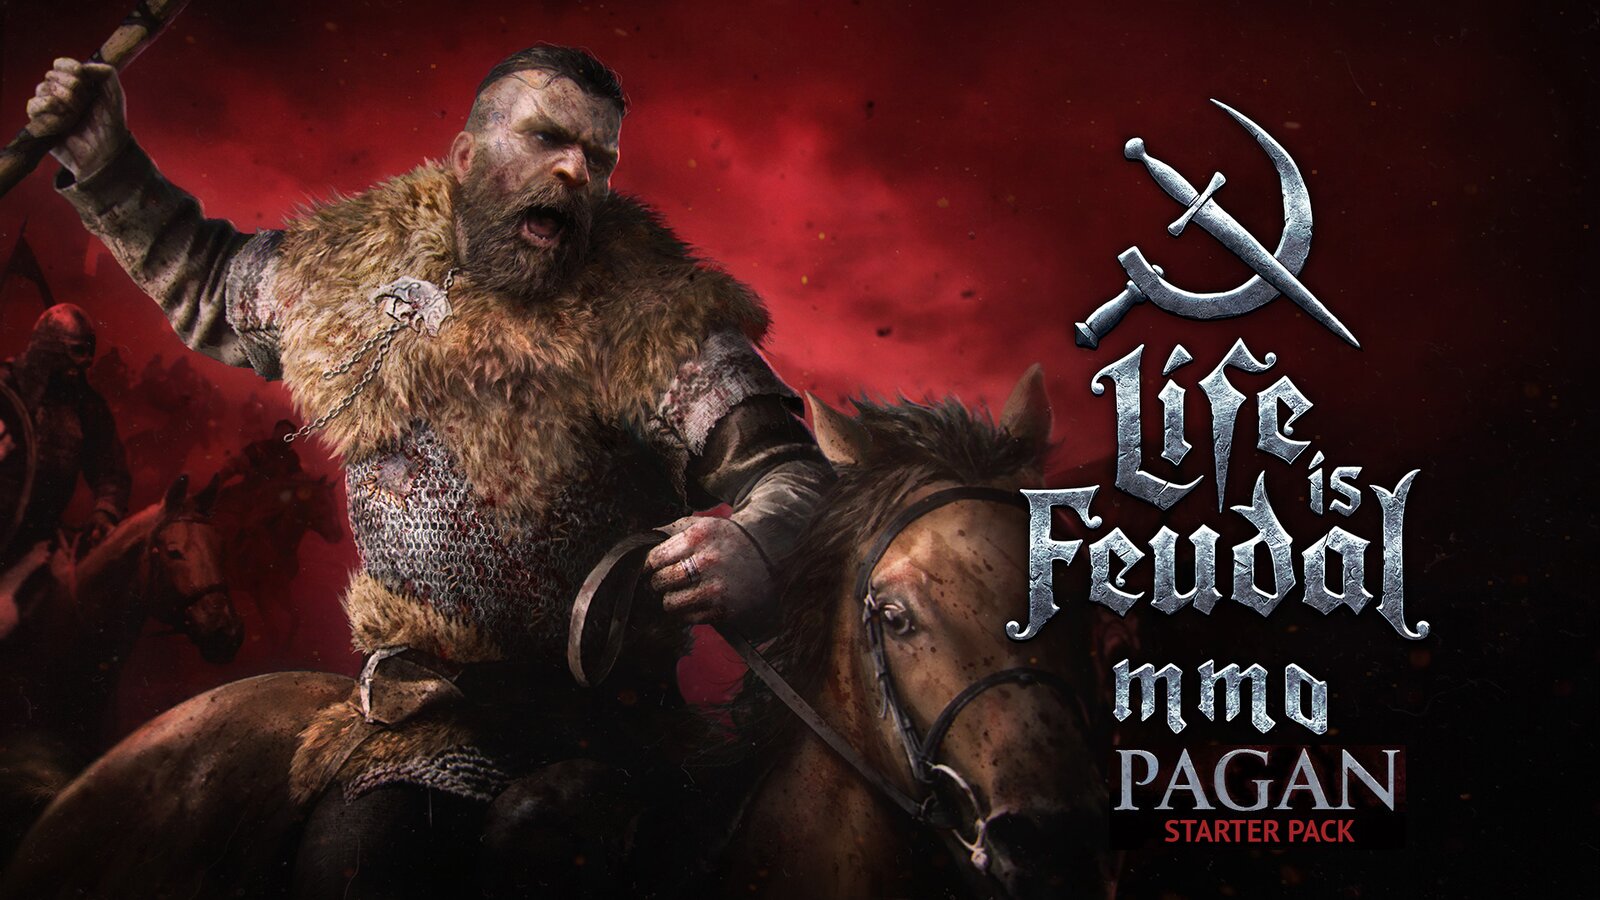 Life is Feudal: MMO - Pagan Starter Pack